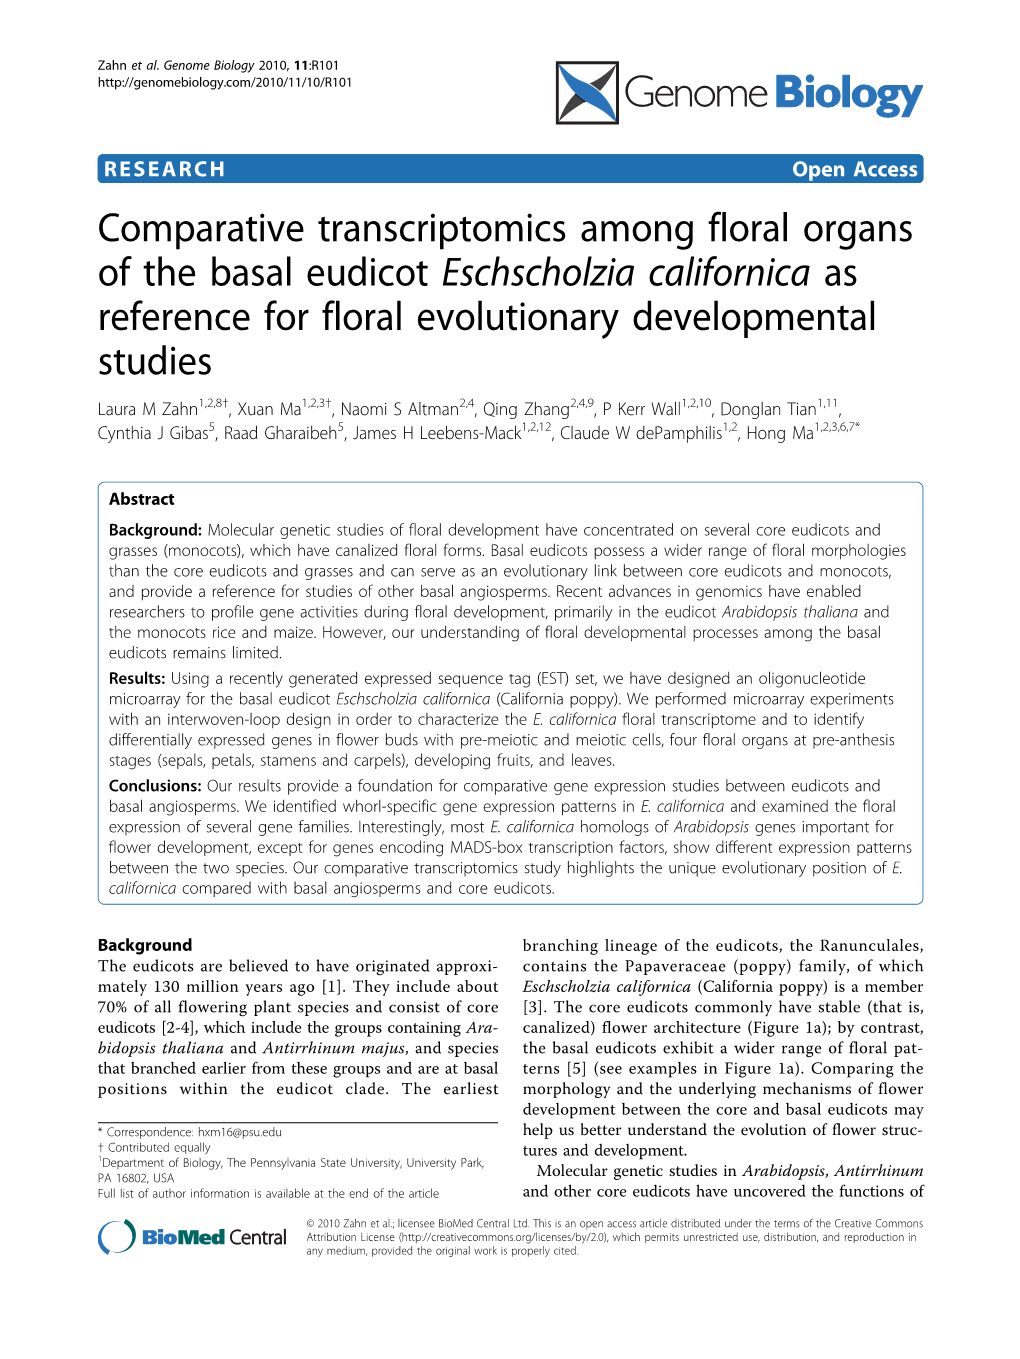 Comparative Transcriptomics Among Floral Organs of the Basal Eudicot Eschscholzia Californica As Reference for Floral Evolutiona